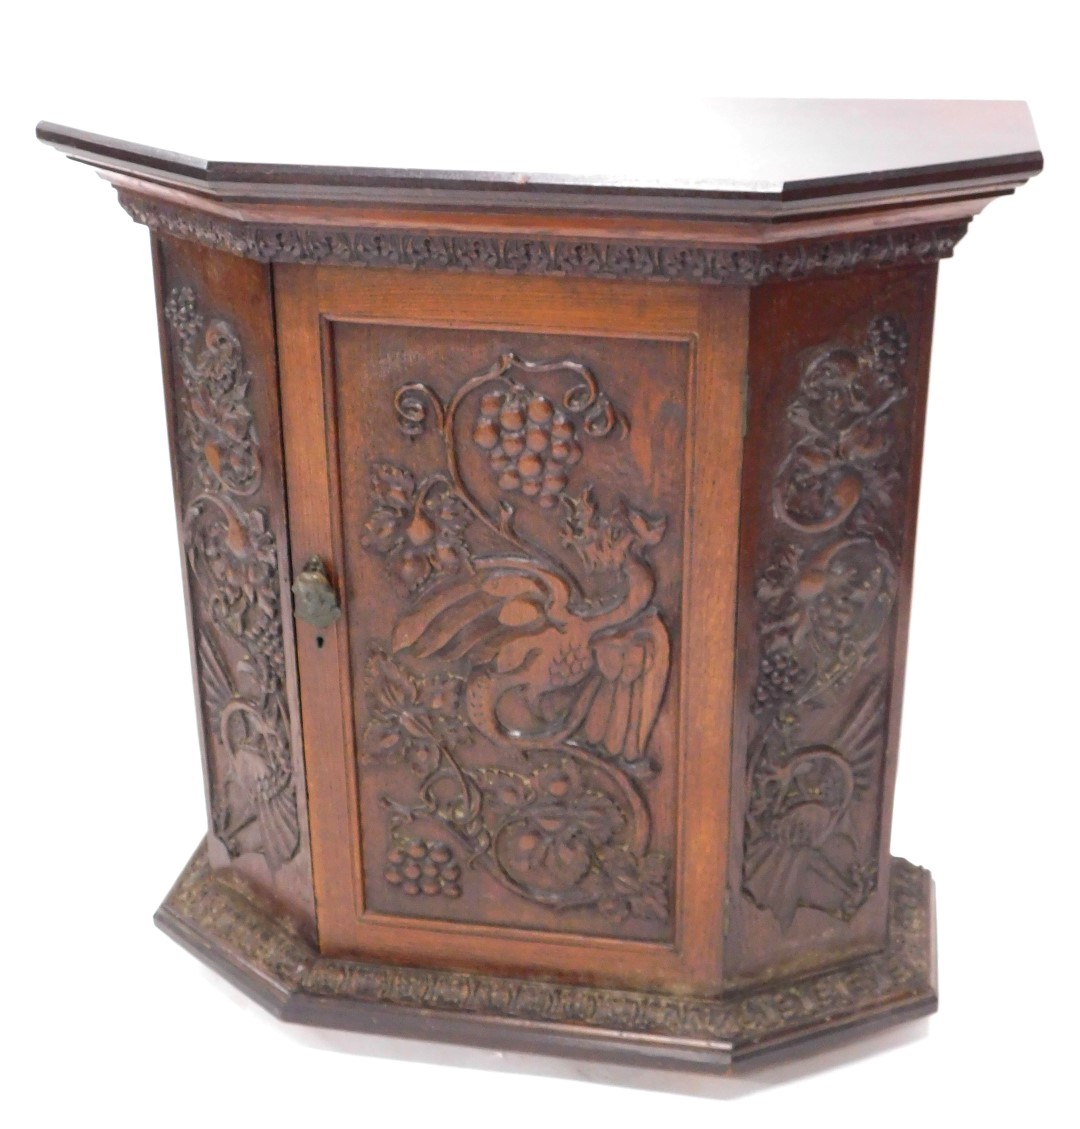 A carved oak side cabinet, with canted corners, the door decorated with grapes, leaves, etc., 89cm h